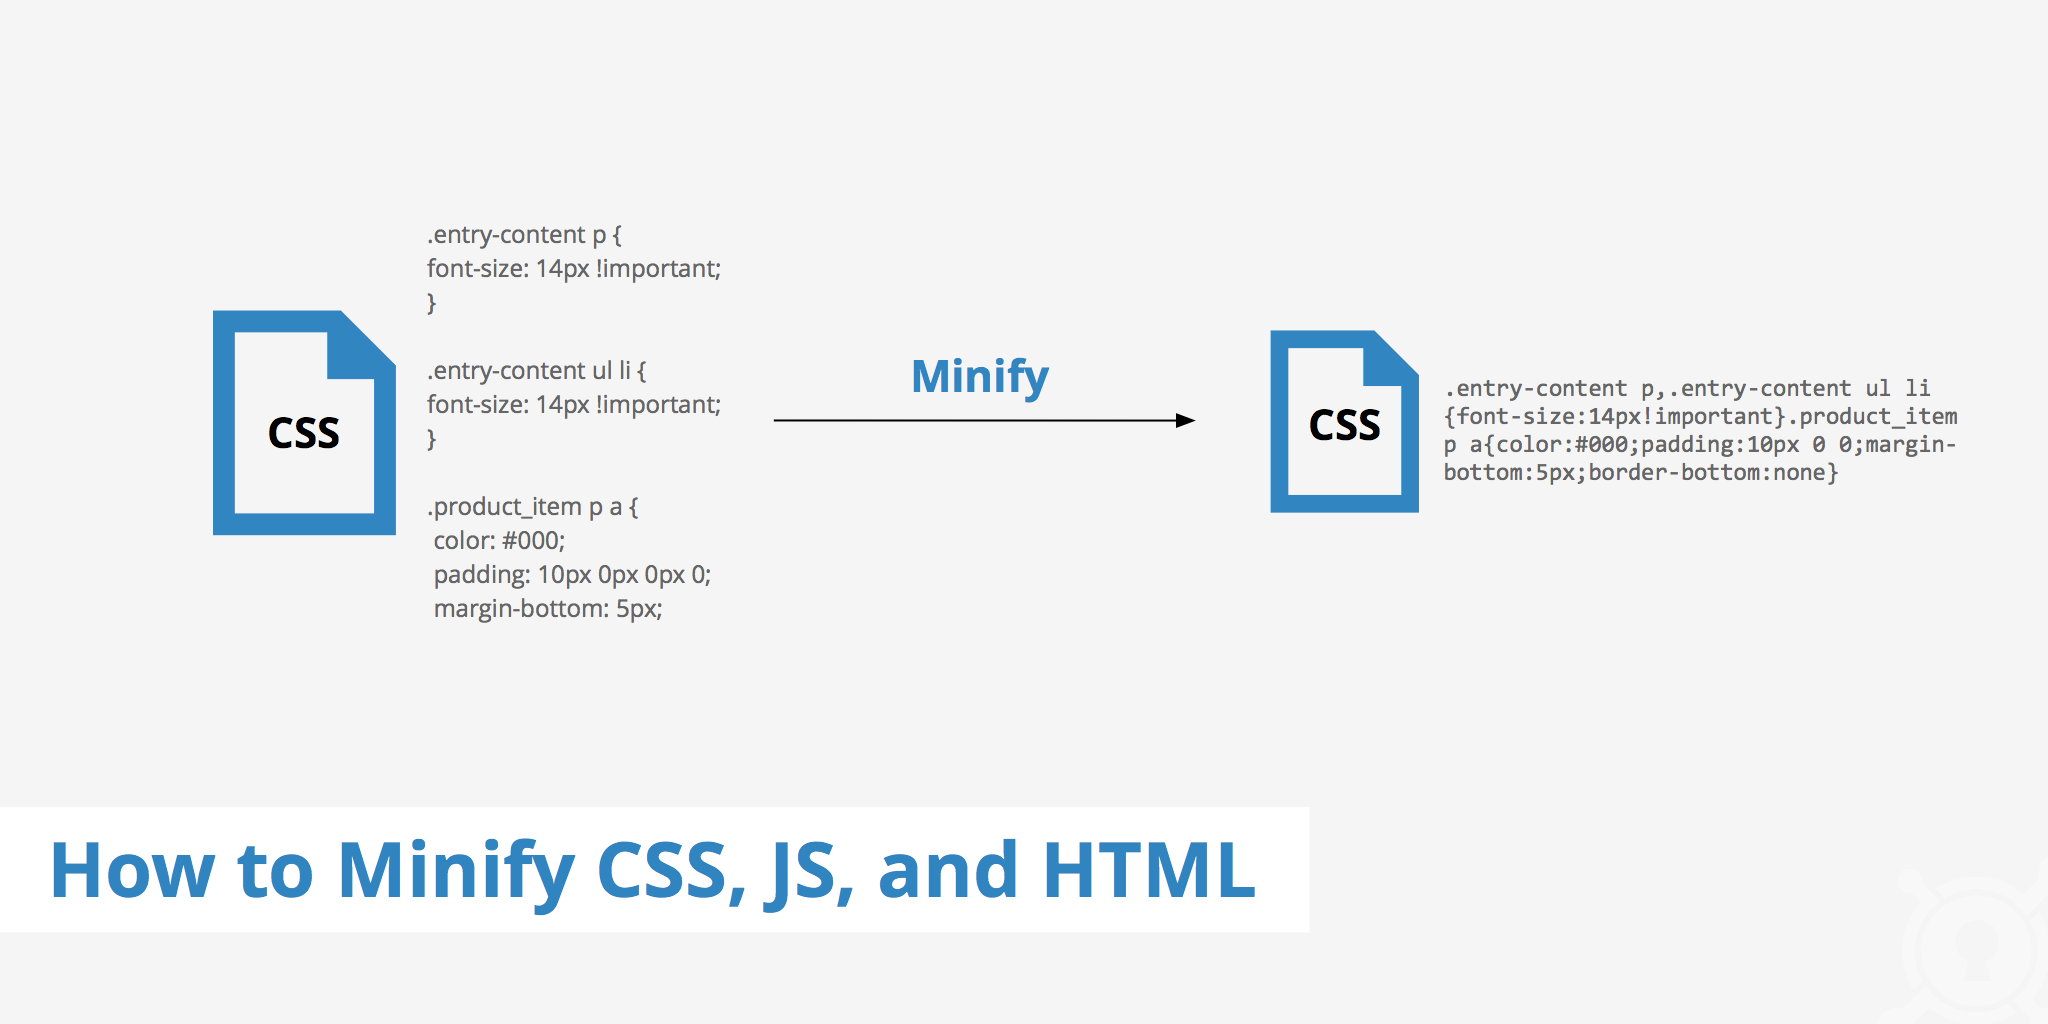 How to Minify CSS, JS, and HTML